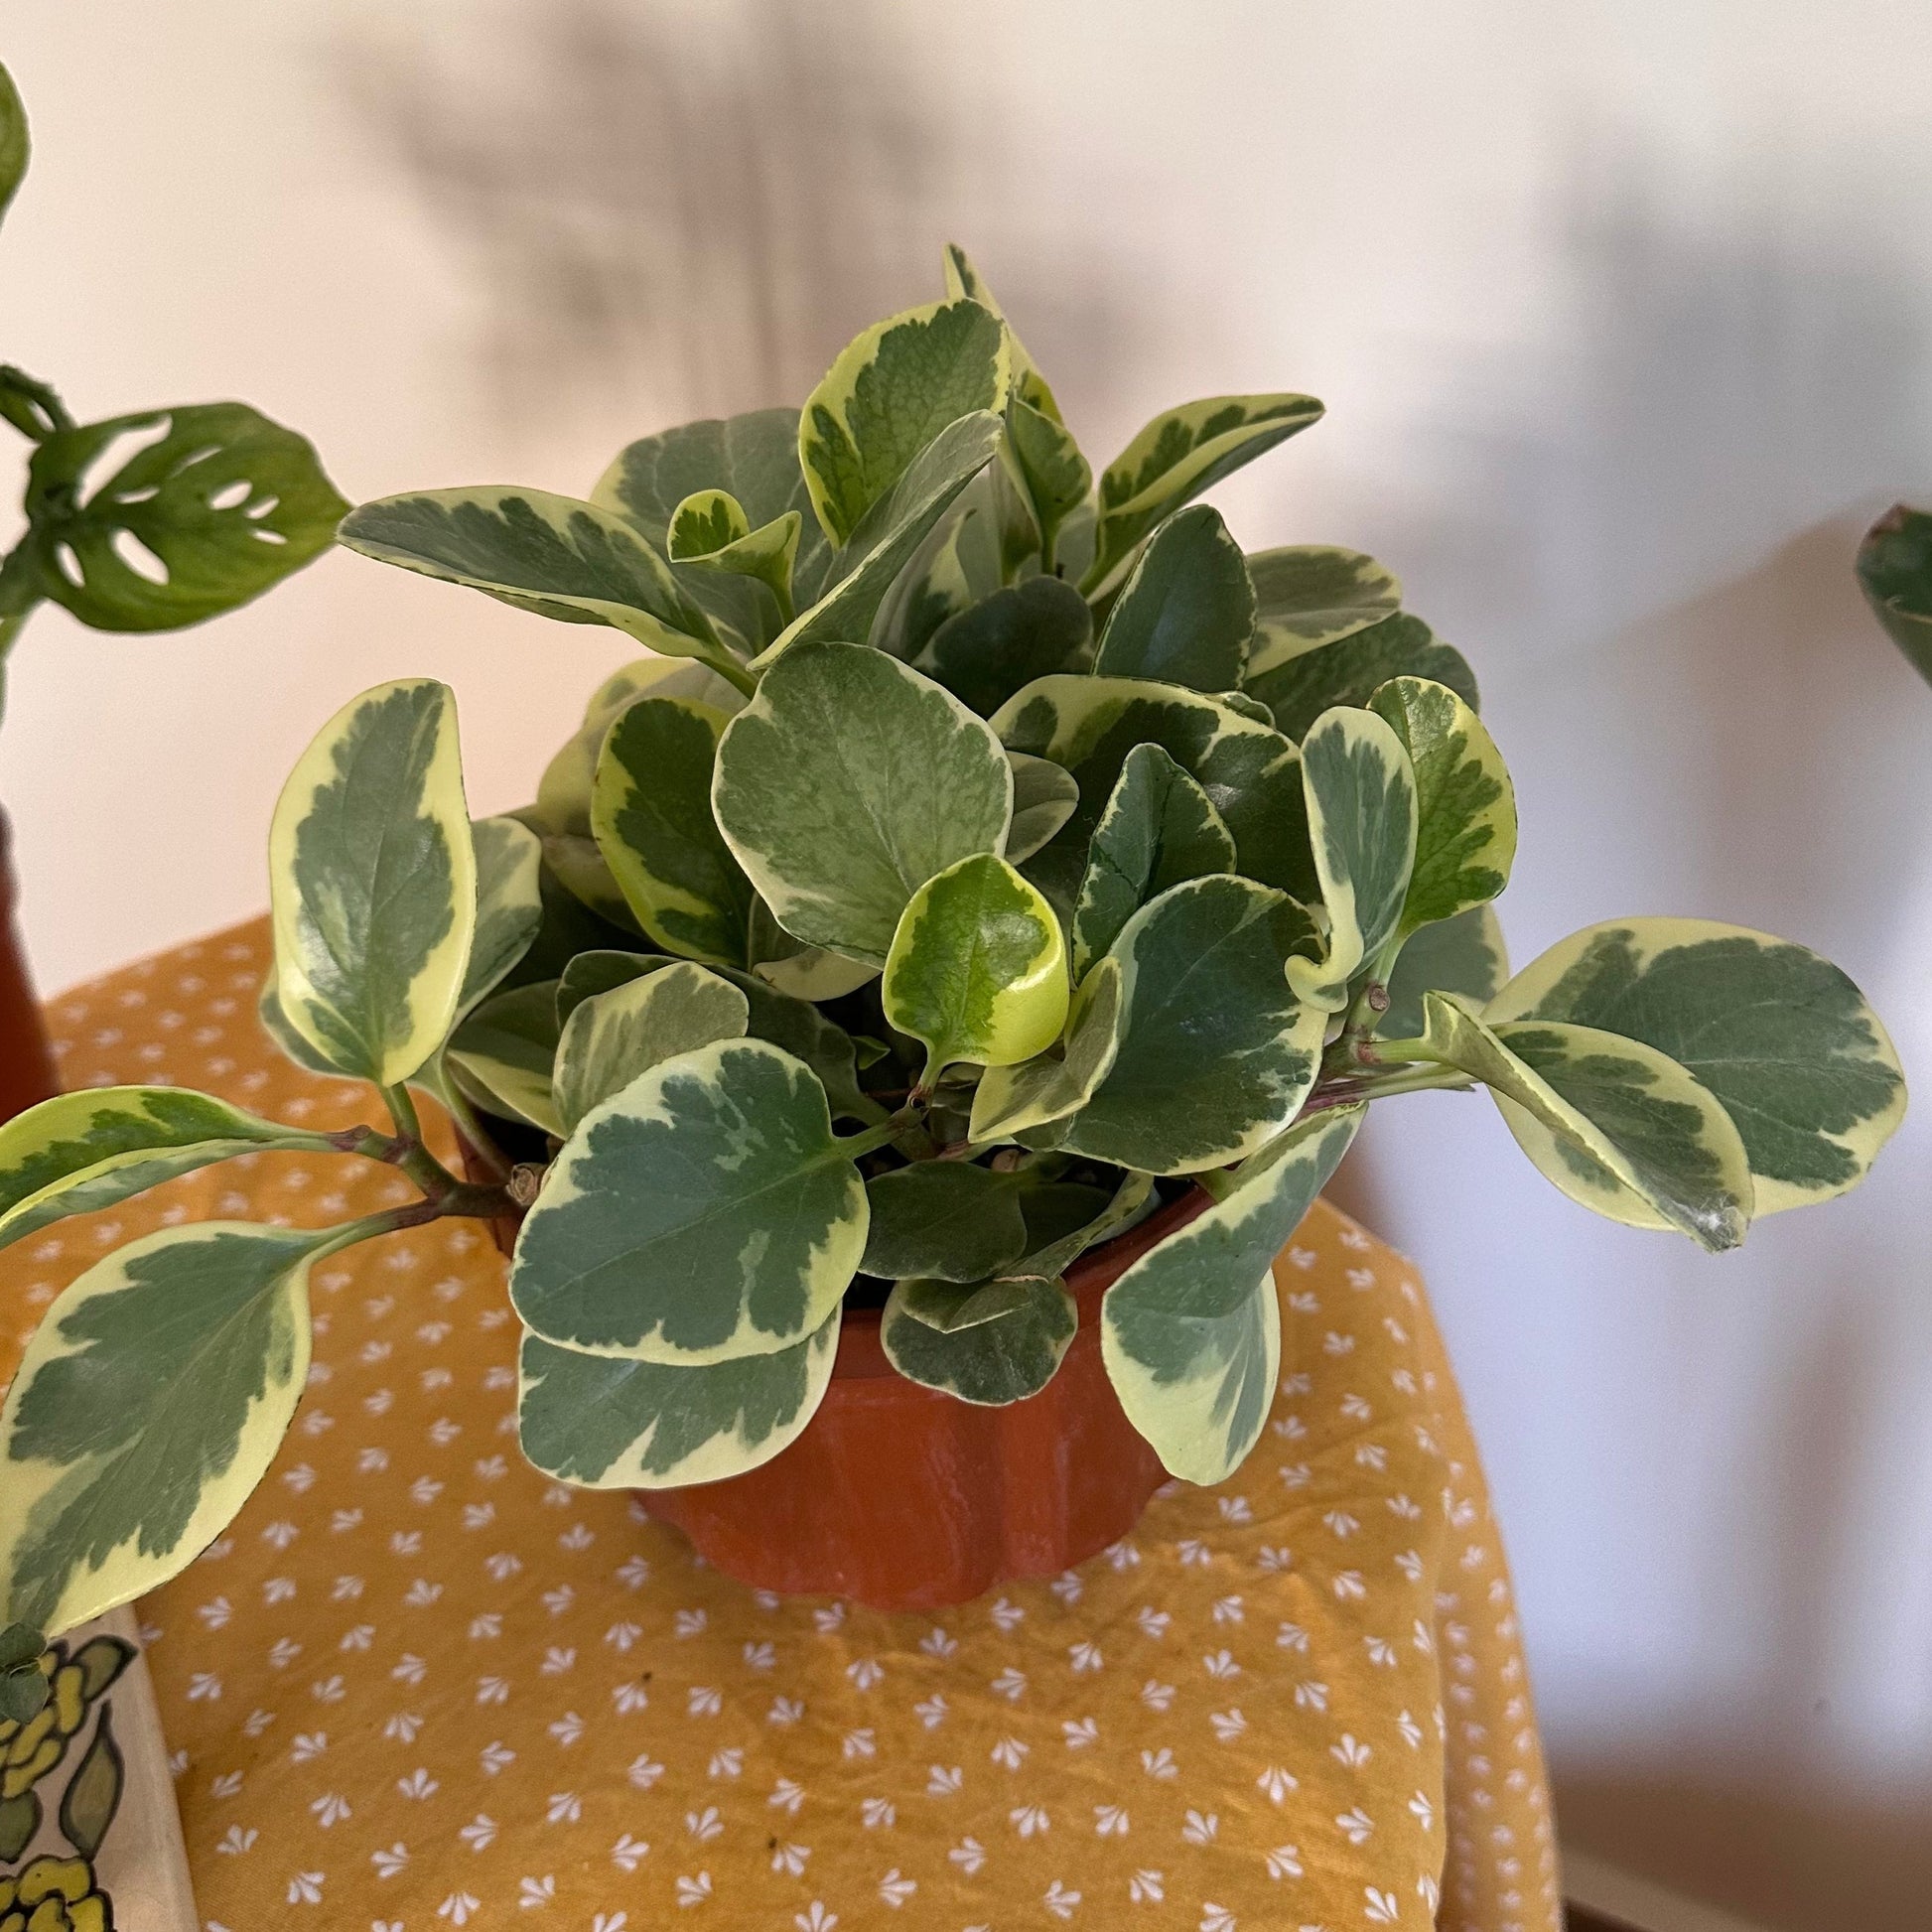 Yellow and green Baby Rubber Plant (Peperomia obtusifolia) - Available on Kaynuna.co in Cairo, Egypt